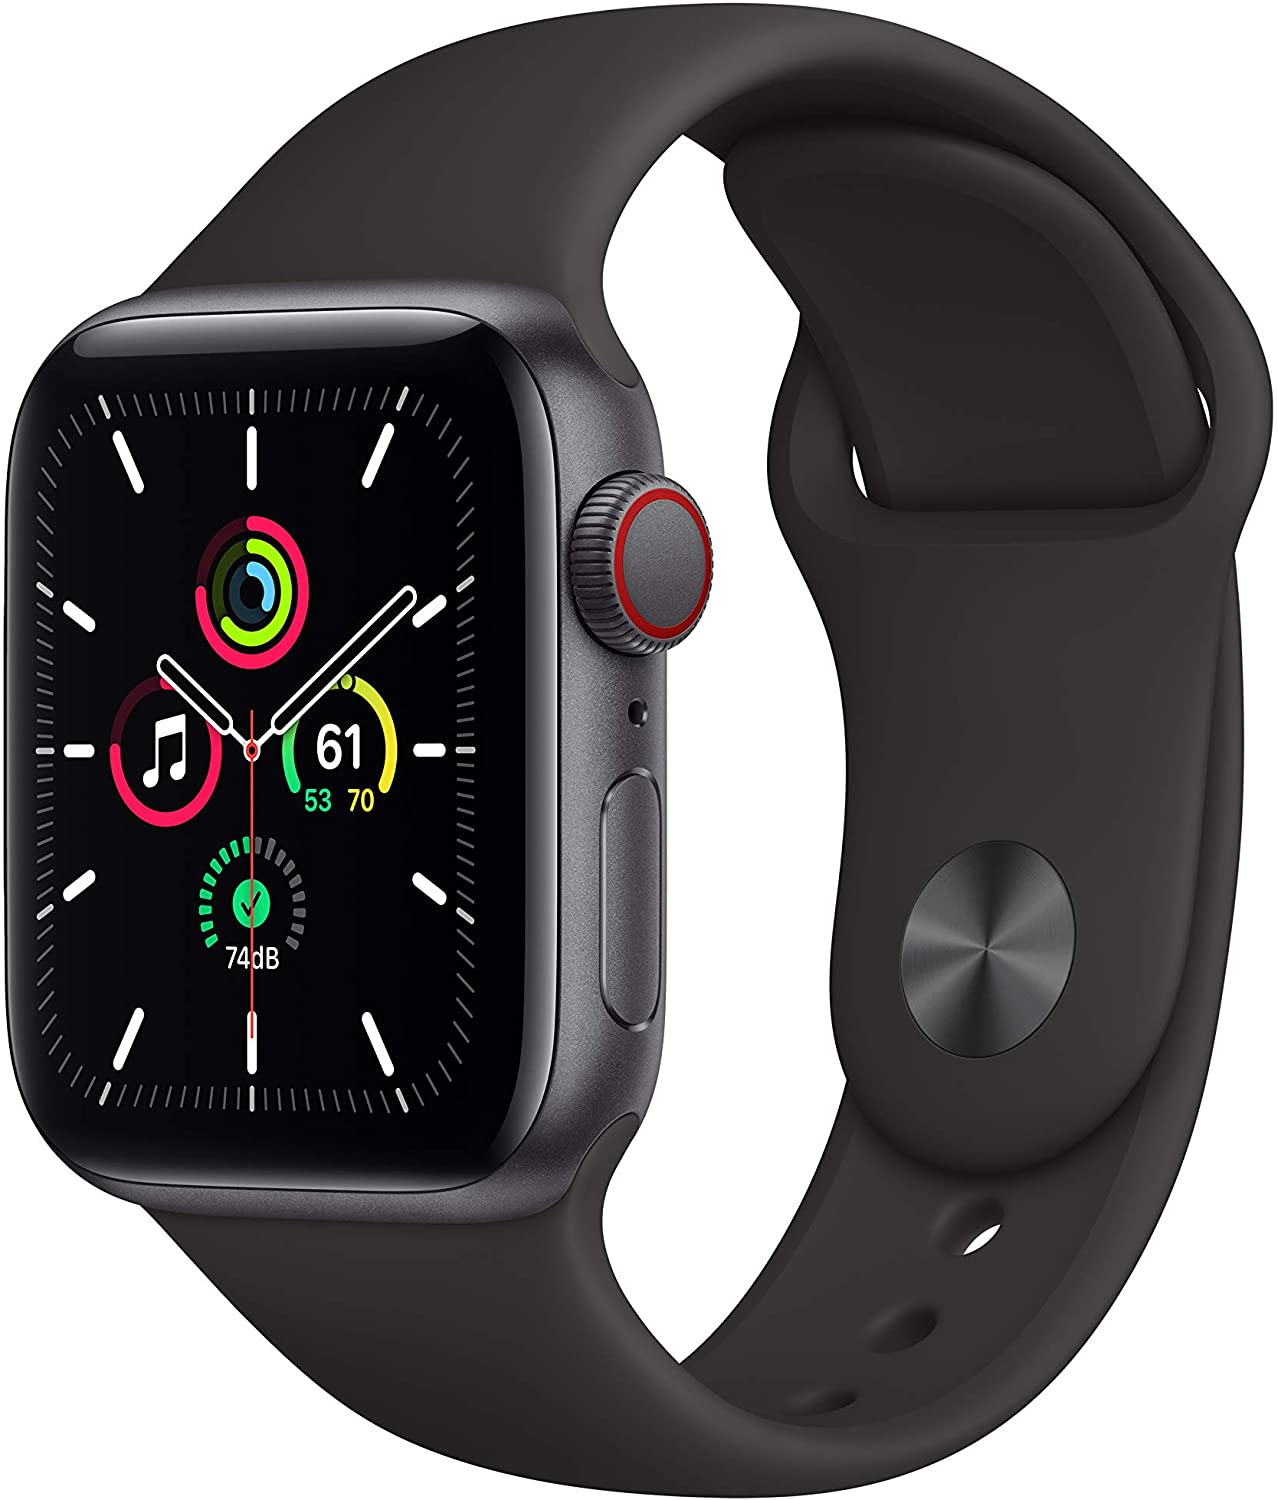 New Apple Watch SE (GPS + Cellular, 40mm) - Space Gray Aluminum Case with Black Sport Band